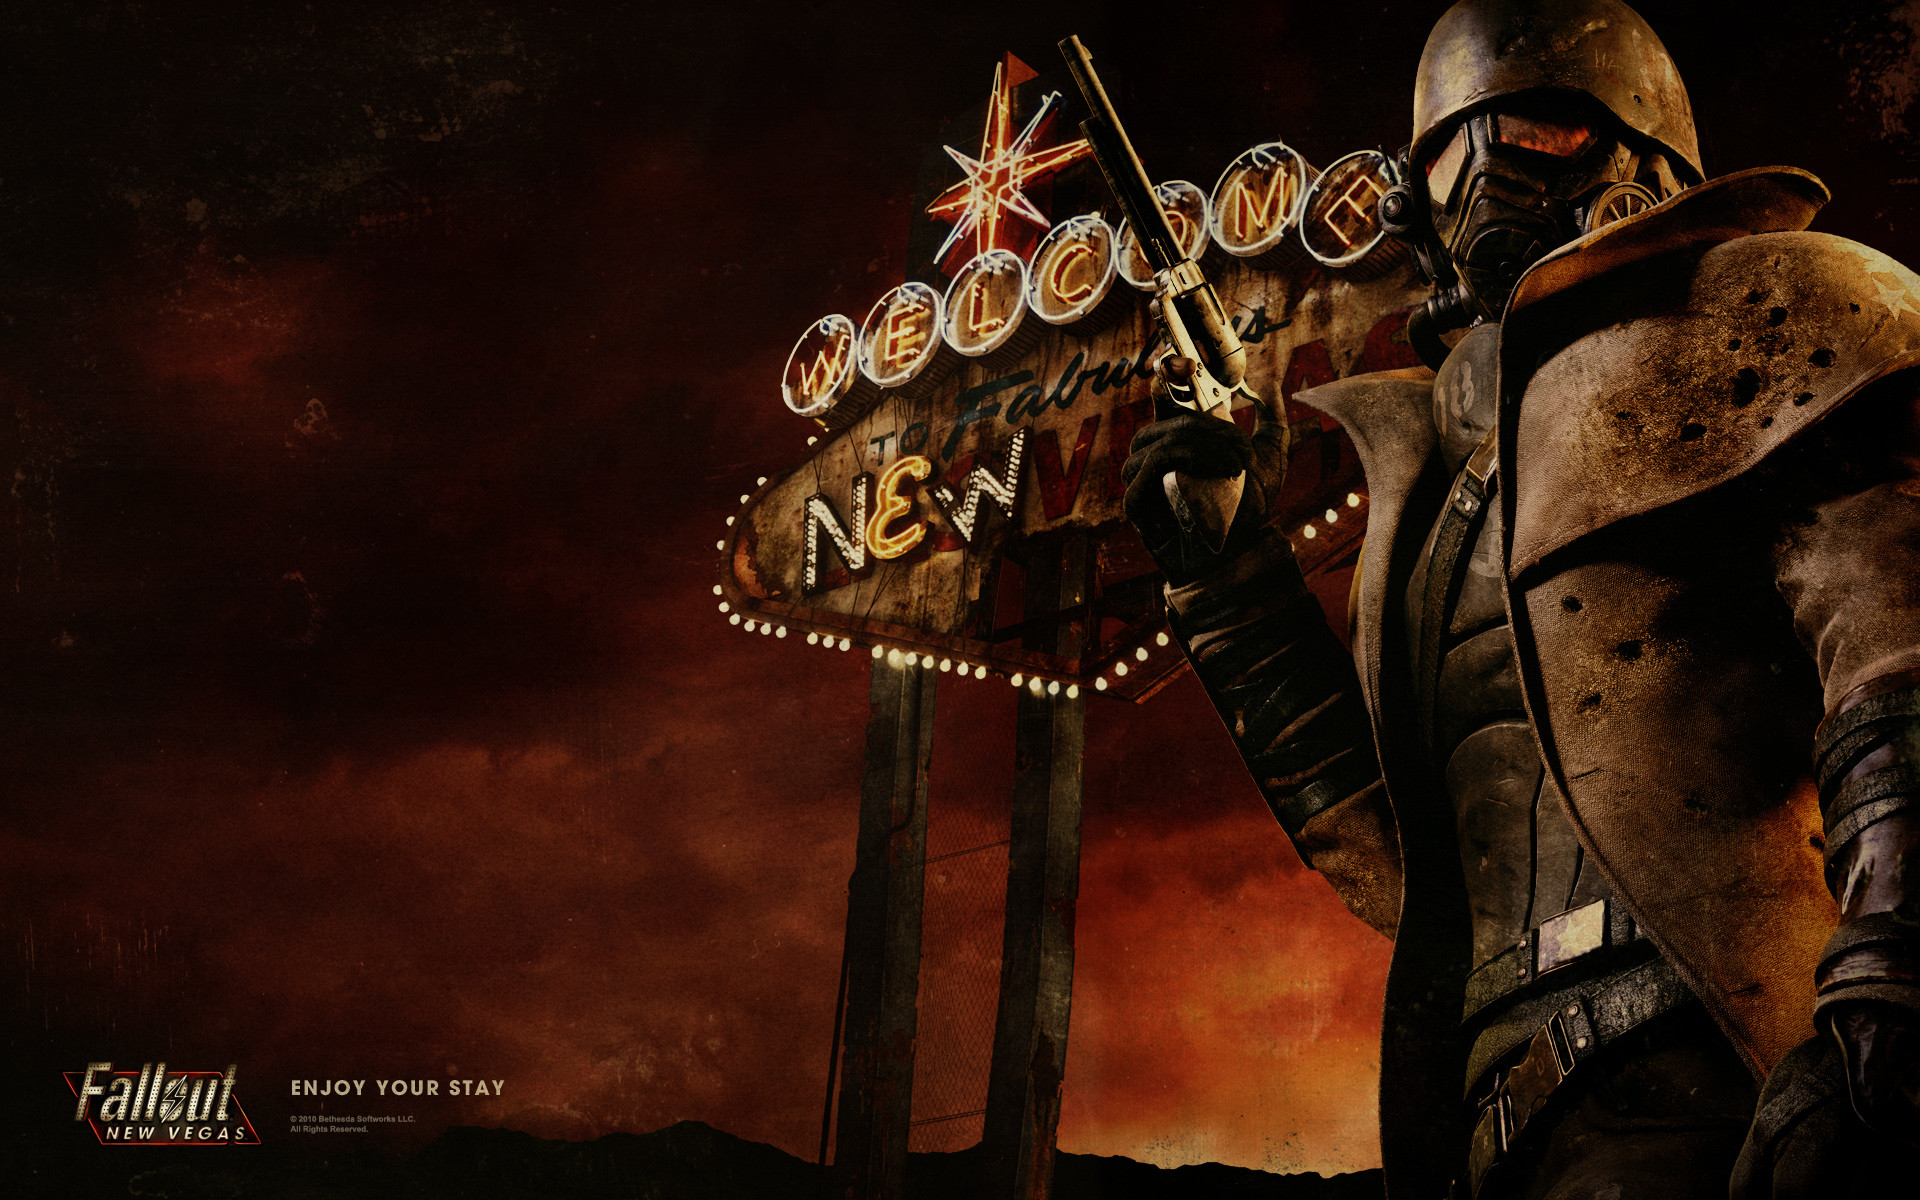 1920x1200 Fallout New Vegas Wallpaper Hd Pictures to Pin on Pinterest | HD Wallpapers  | Pinterest | Fallout and Wallpaper